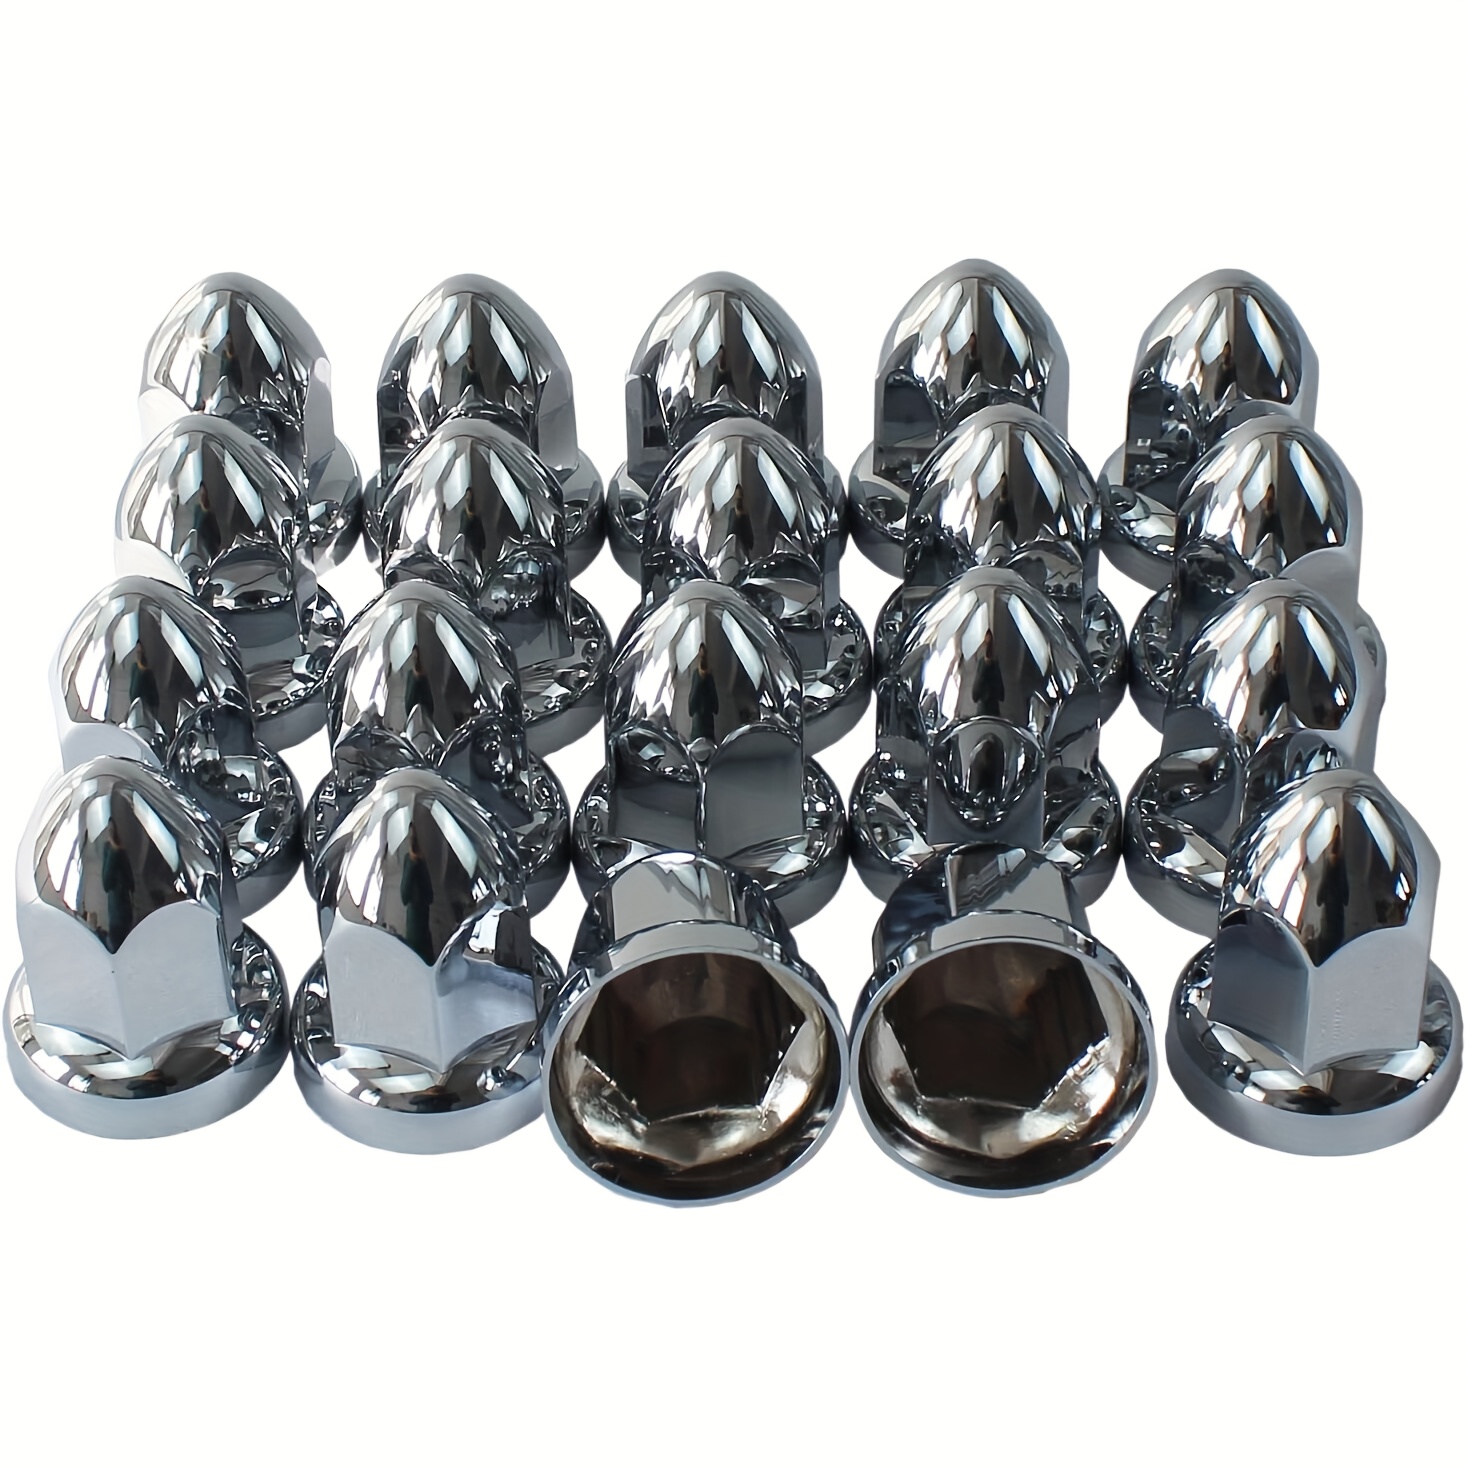 

20pcs/pack Bright Chrome Finish High Impact Abs Material Removable Caps Lug Nut Covers Push On 3/8" Bullet Style Plastic Chrome For Semi Truck